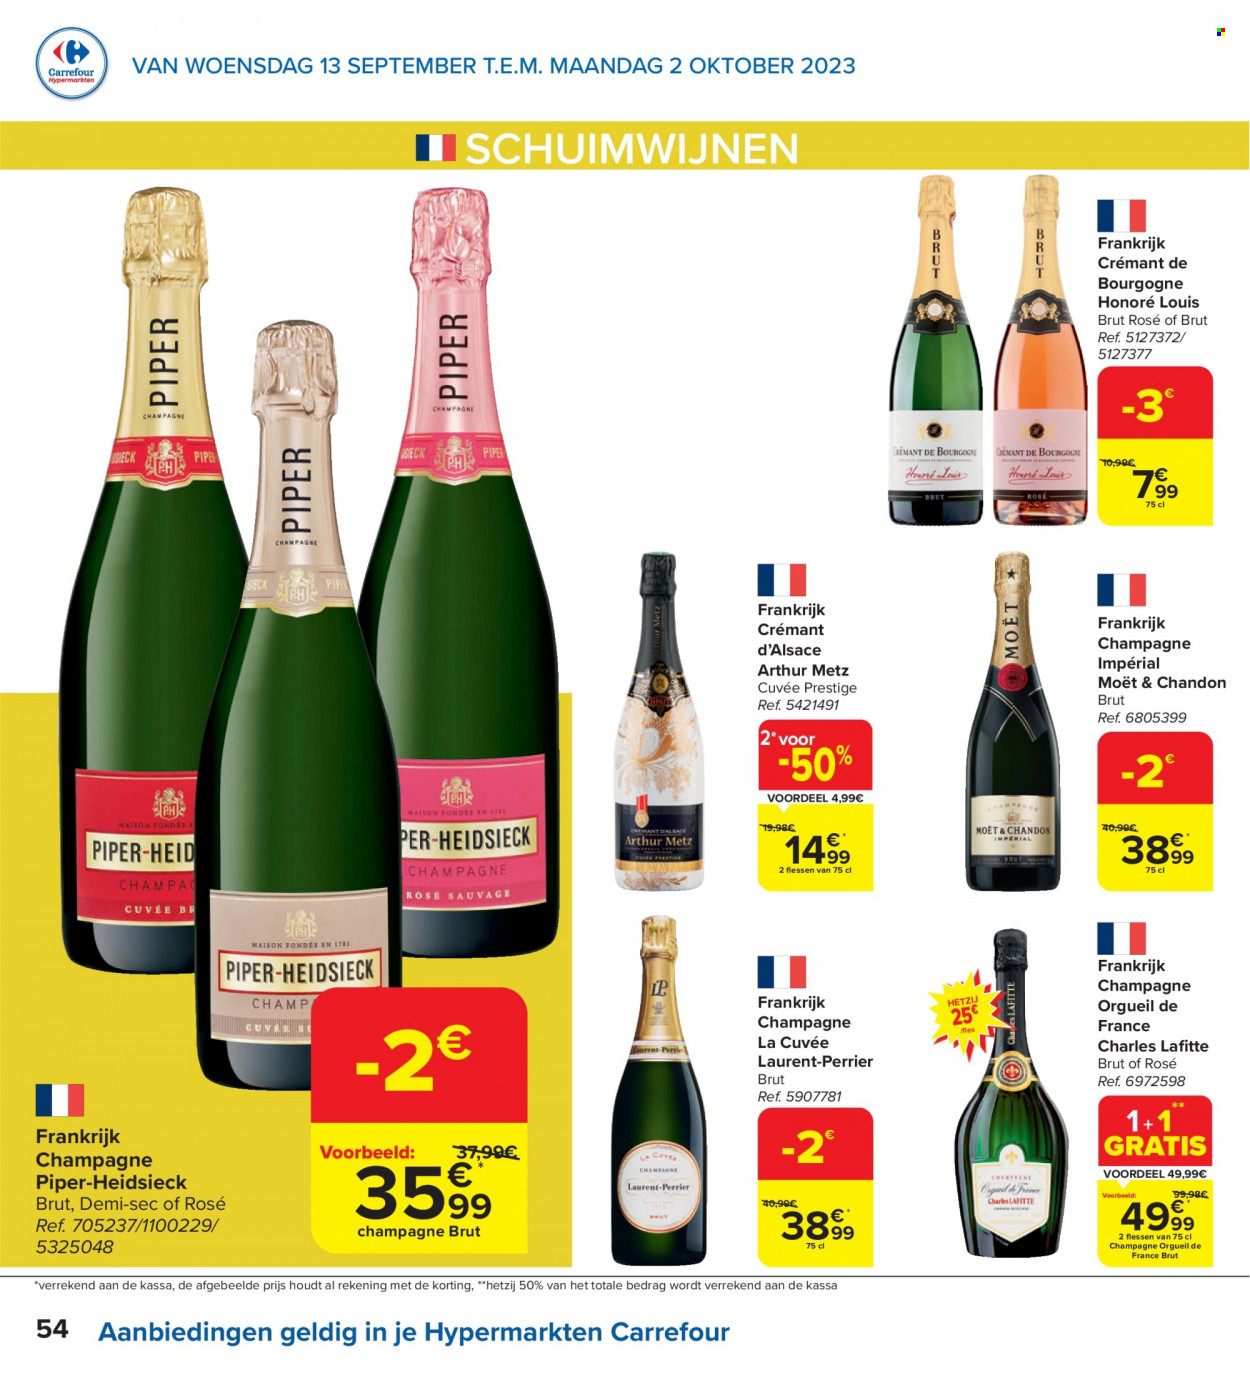 Catalogue Carrefour hypermarkt - 13.9.2023 - 2.10.2023. Page 26.